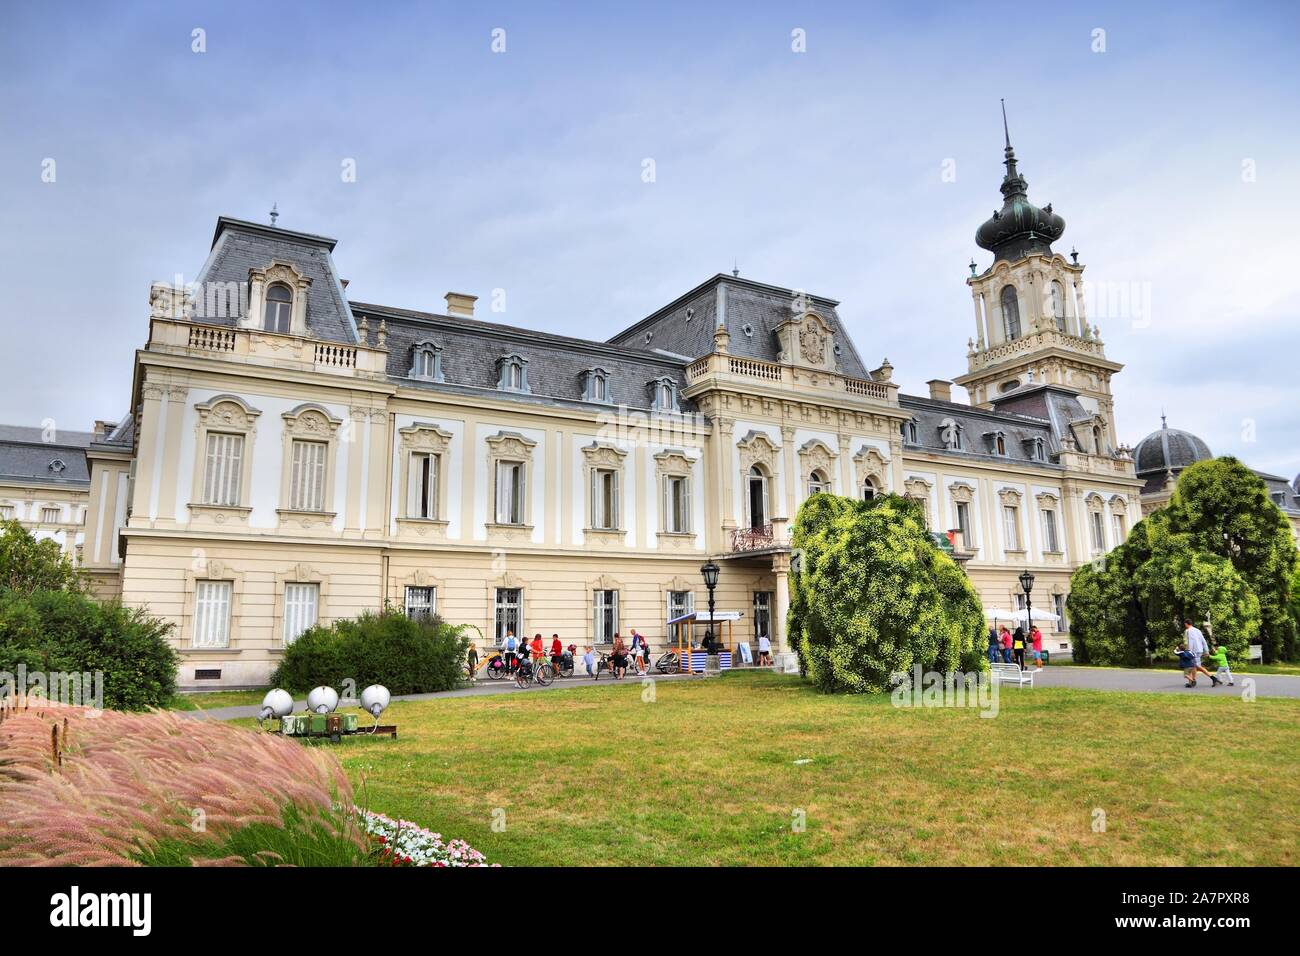 KESZTHELY, HUNGARY - AUGUST 11, 2012: Tourists visit Festetics Palace in Keszthely, Hungary. In 2011 tourism receipts in Hungary brought 4.03 billion Stock Photo